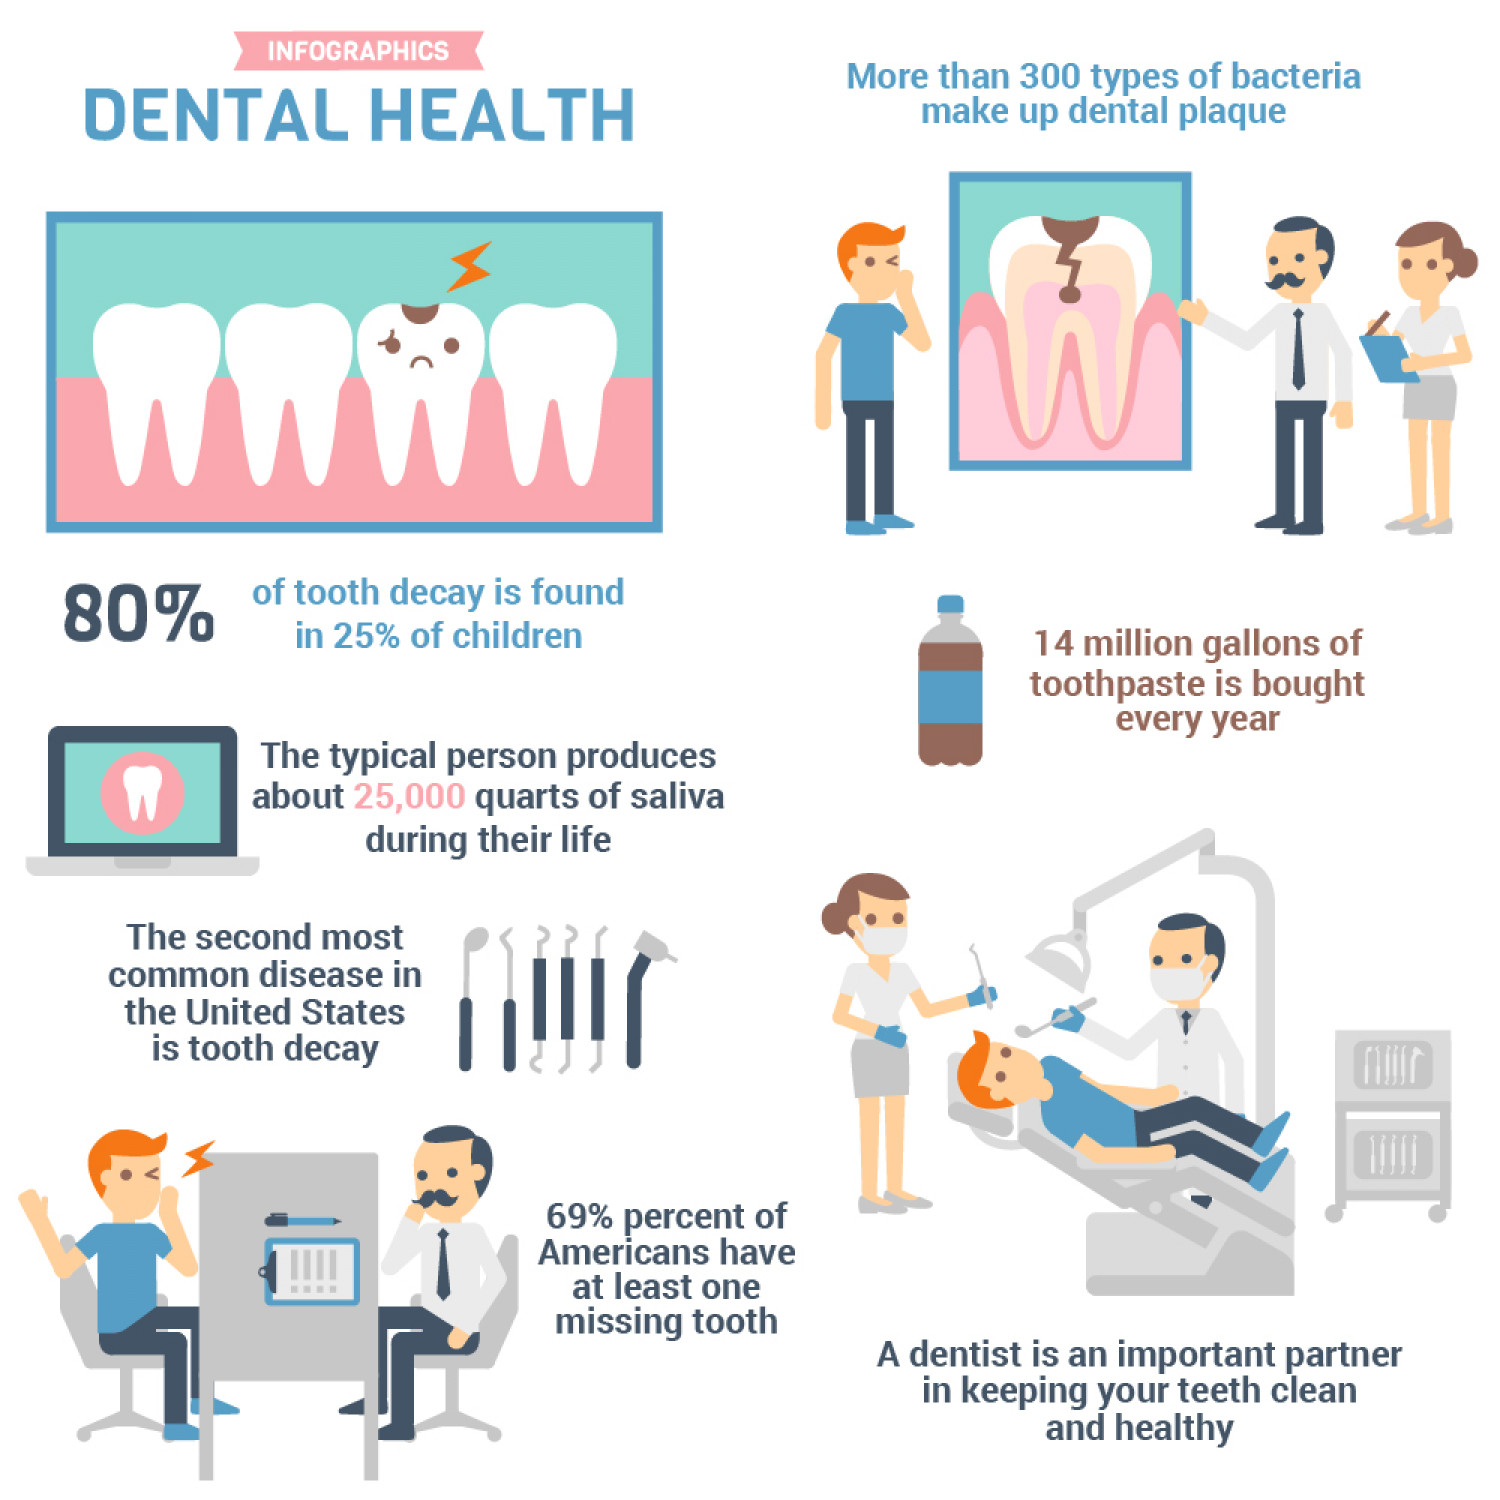 Dental Implants Infographic | Visual.ly